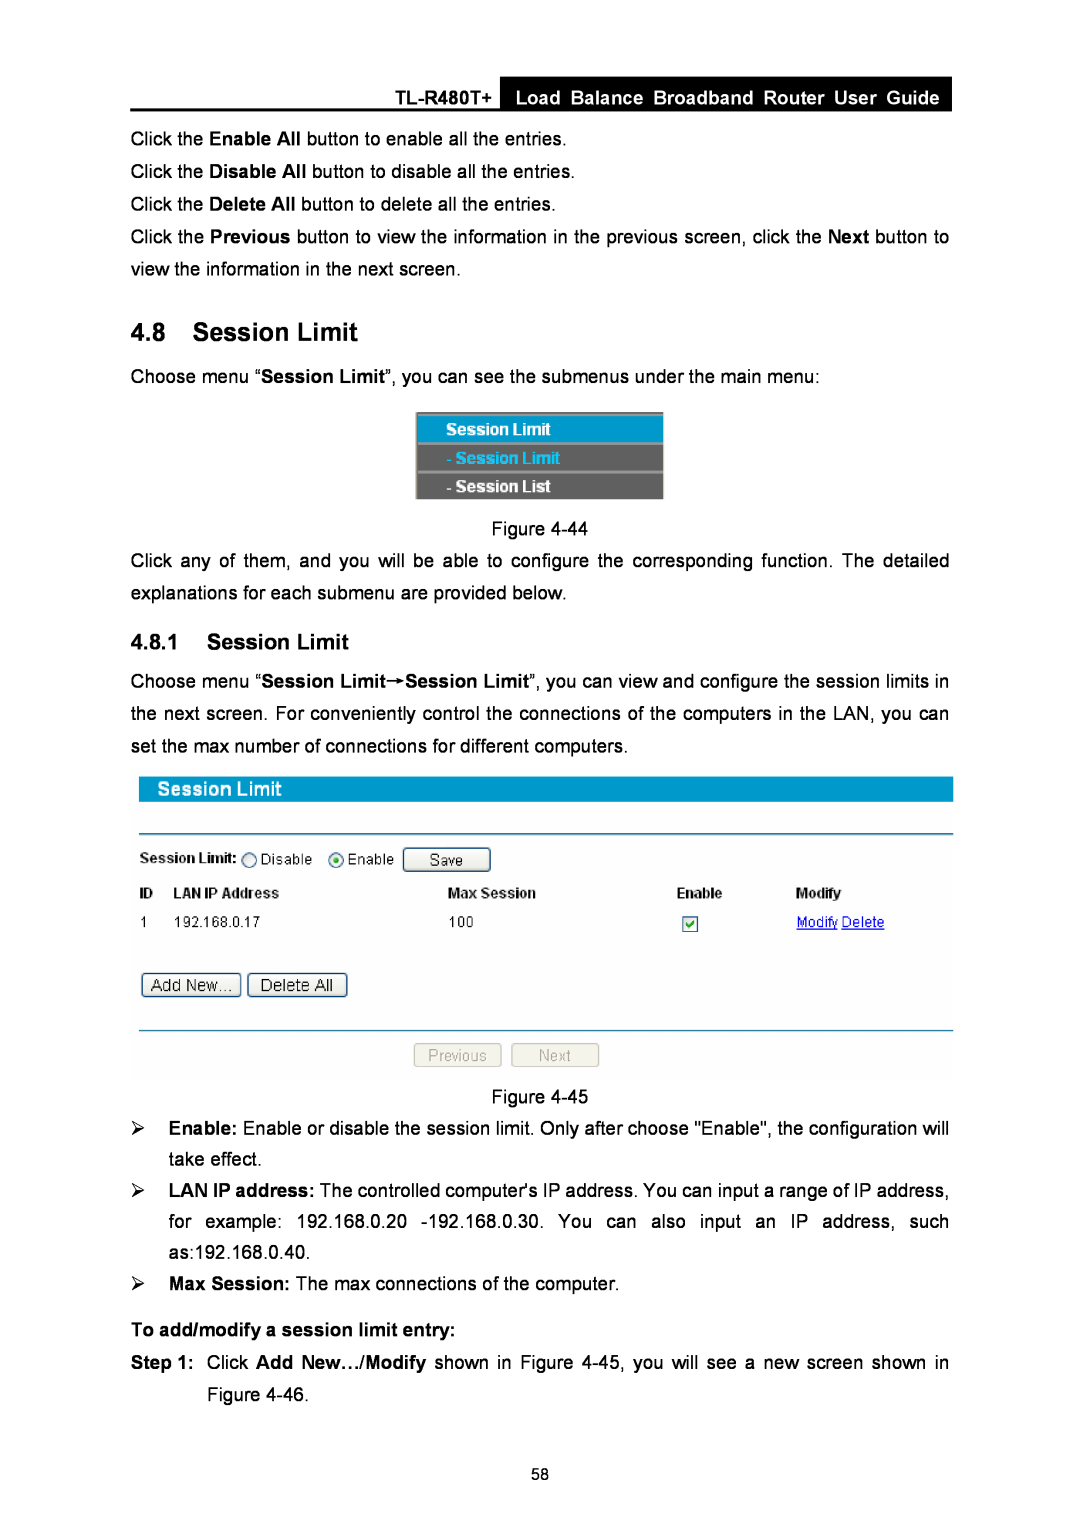 TP-Link TL-R480T+ manual Session Limit, Load Balance Broadband Router User Guide, To add/modify a session limit entry 